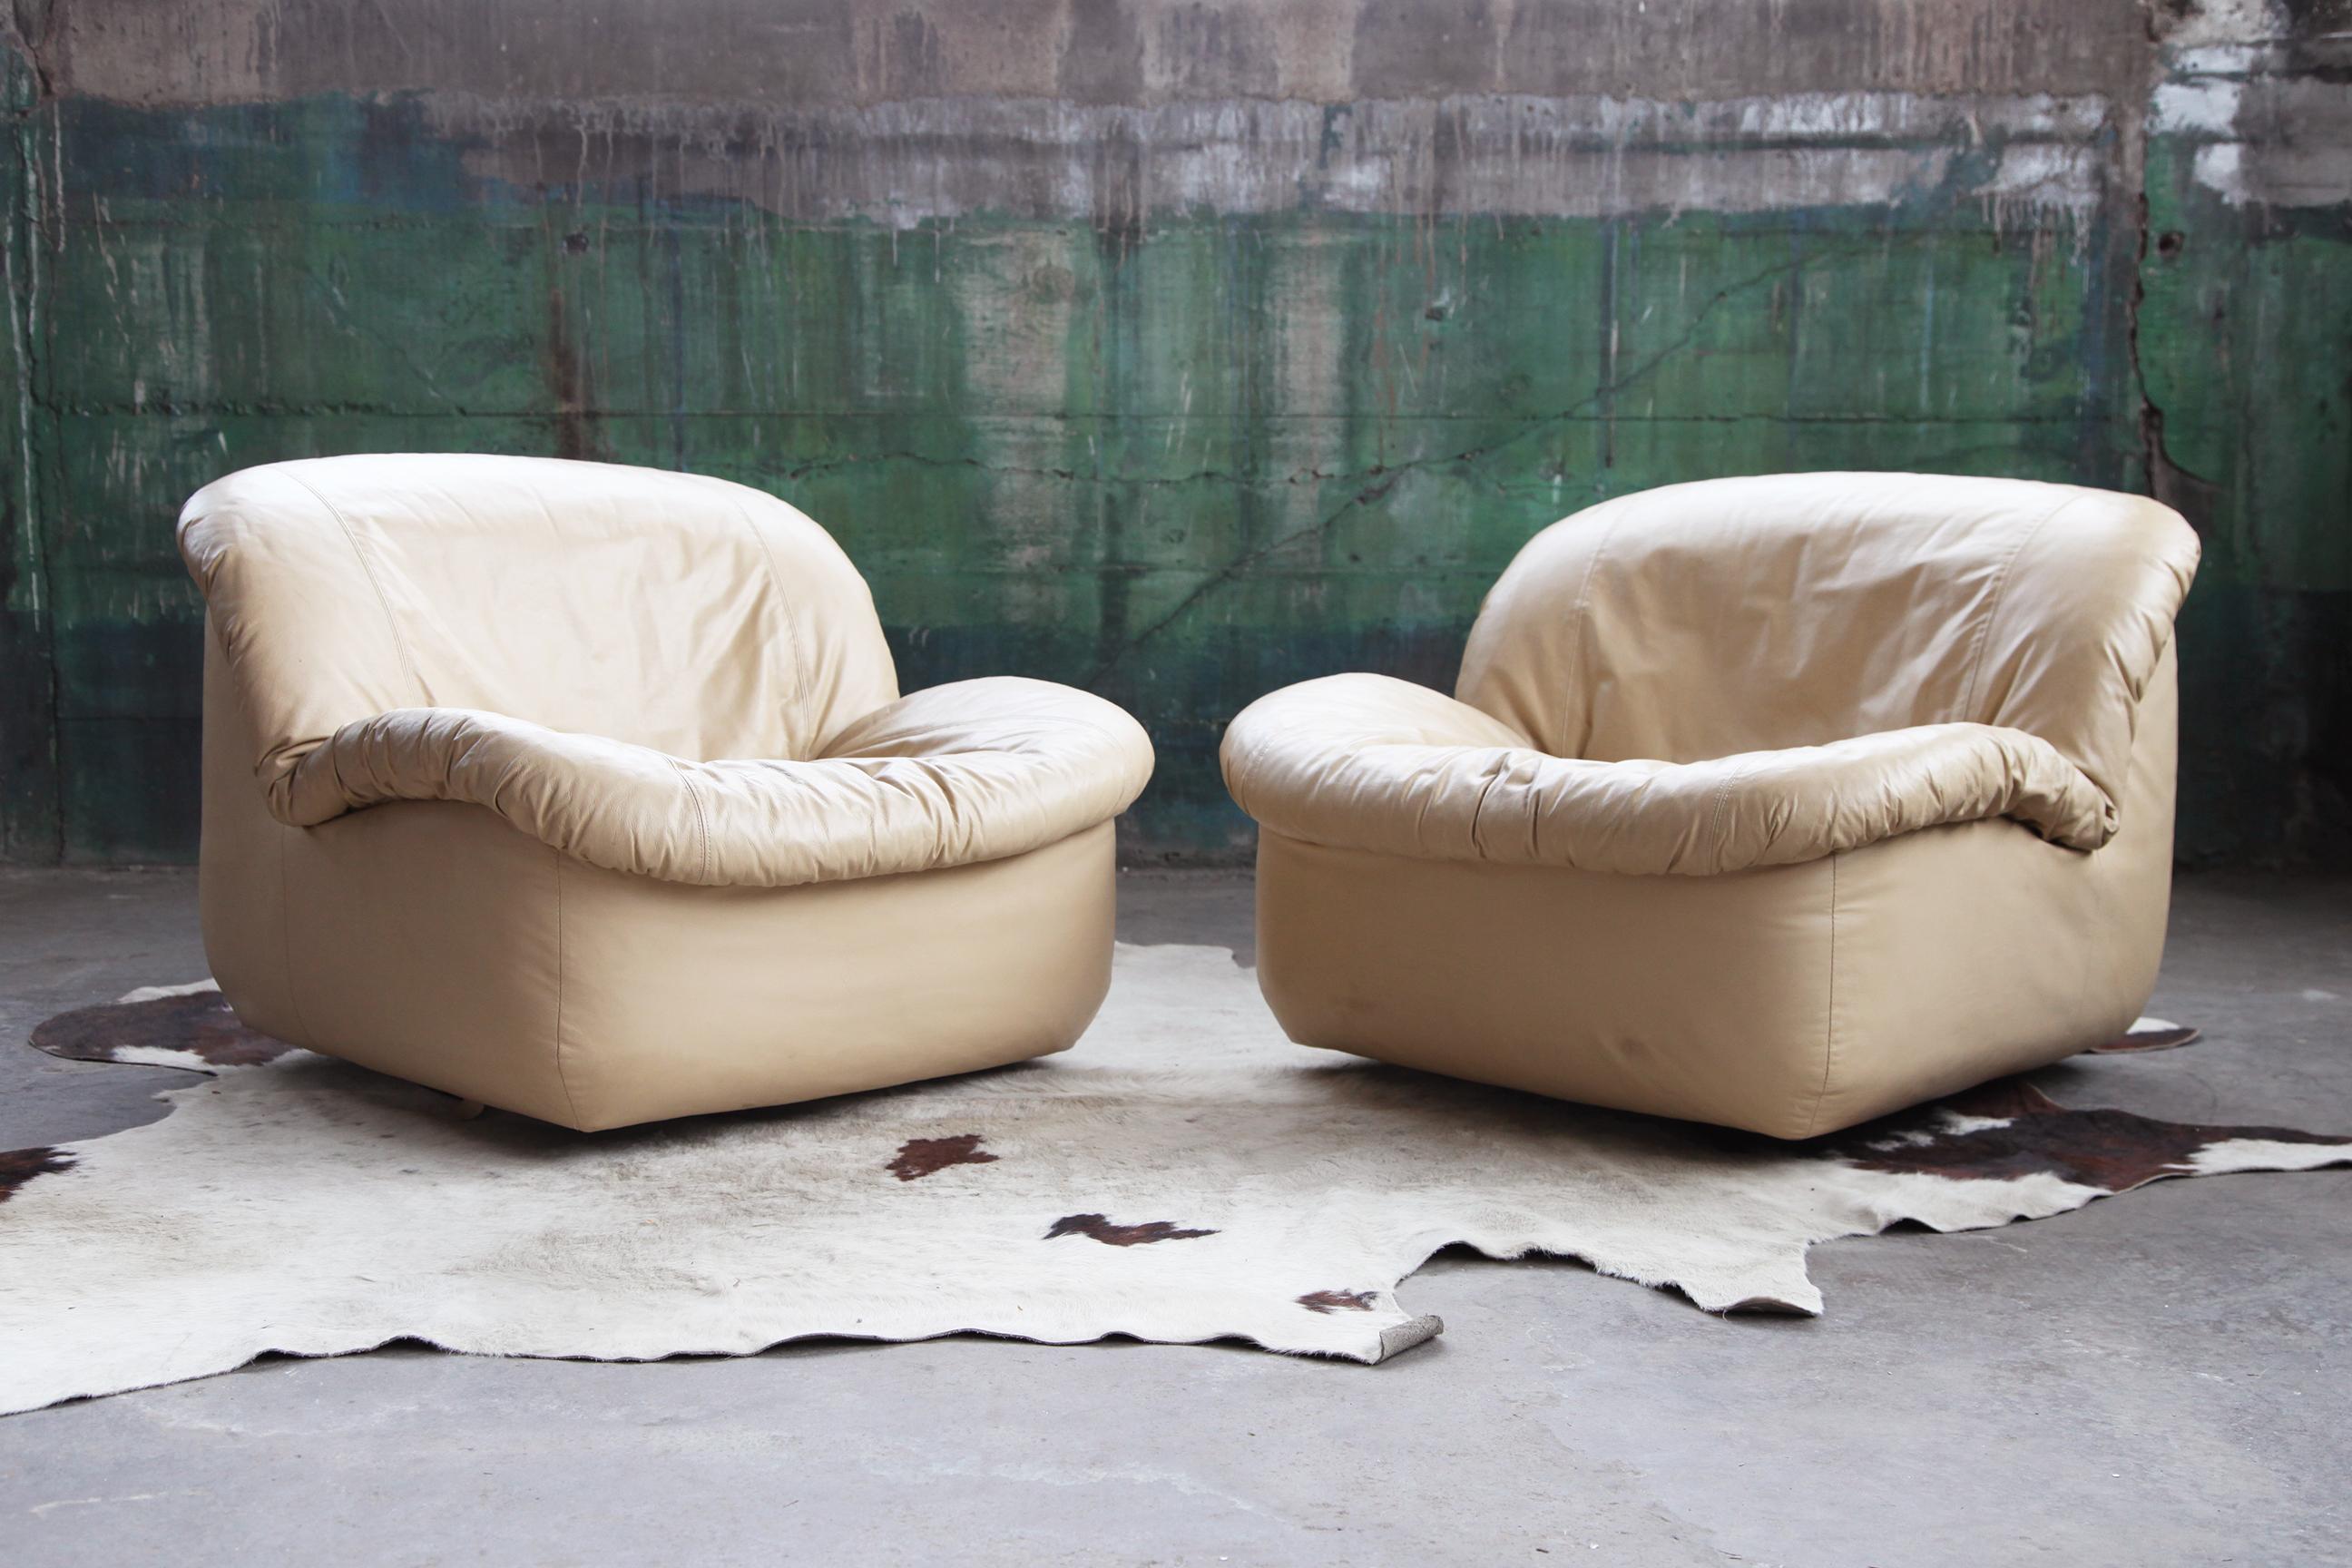 Fantastic Postmodern Vintage 80's gorgeous leather swivel chairs.
Very Sexy chairs!!

Sold individually here, and we have three available total.

They work beautifully as lounge chairs separately or together in a space to work as a sofa /